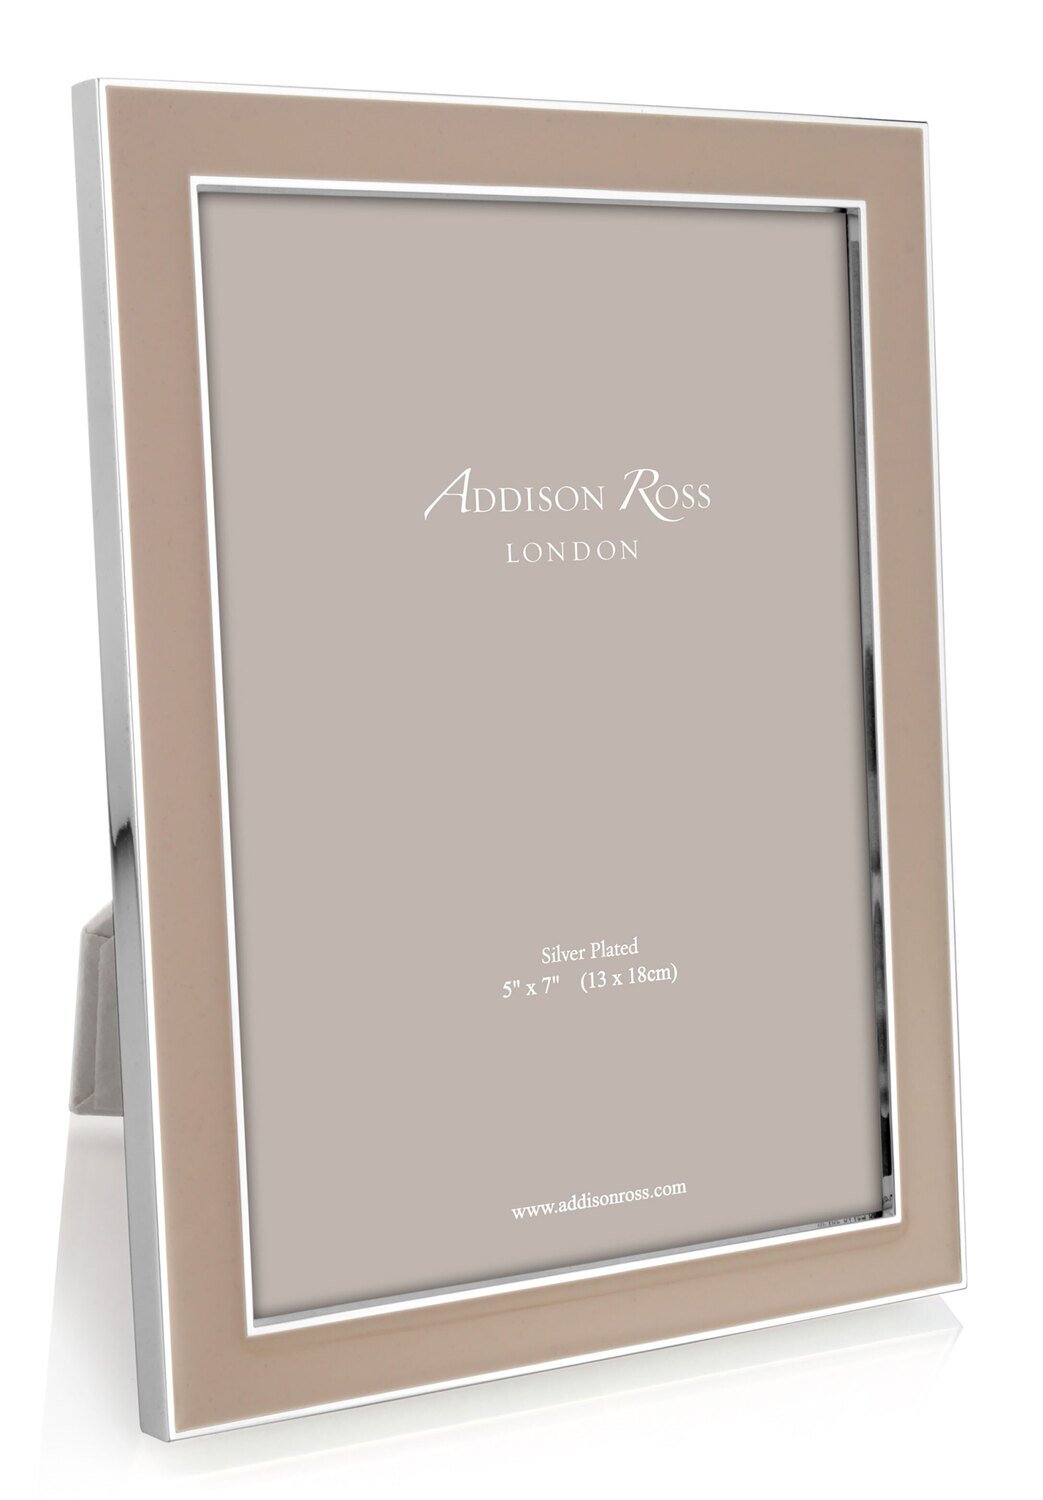 Addison Ross Cappuccino Enamel Picture Frame 4 x 6 Inch Silver-plated FR0950